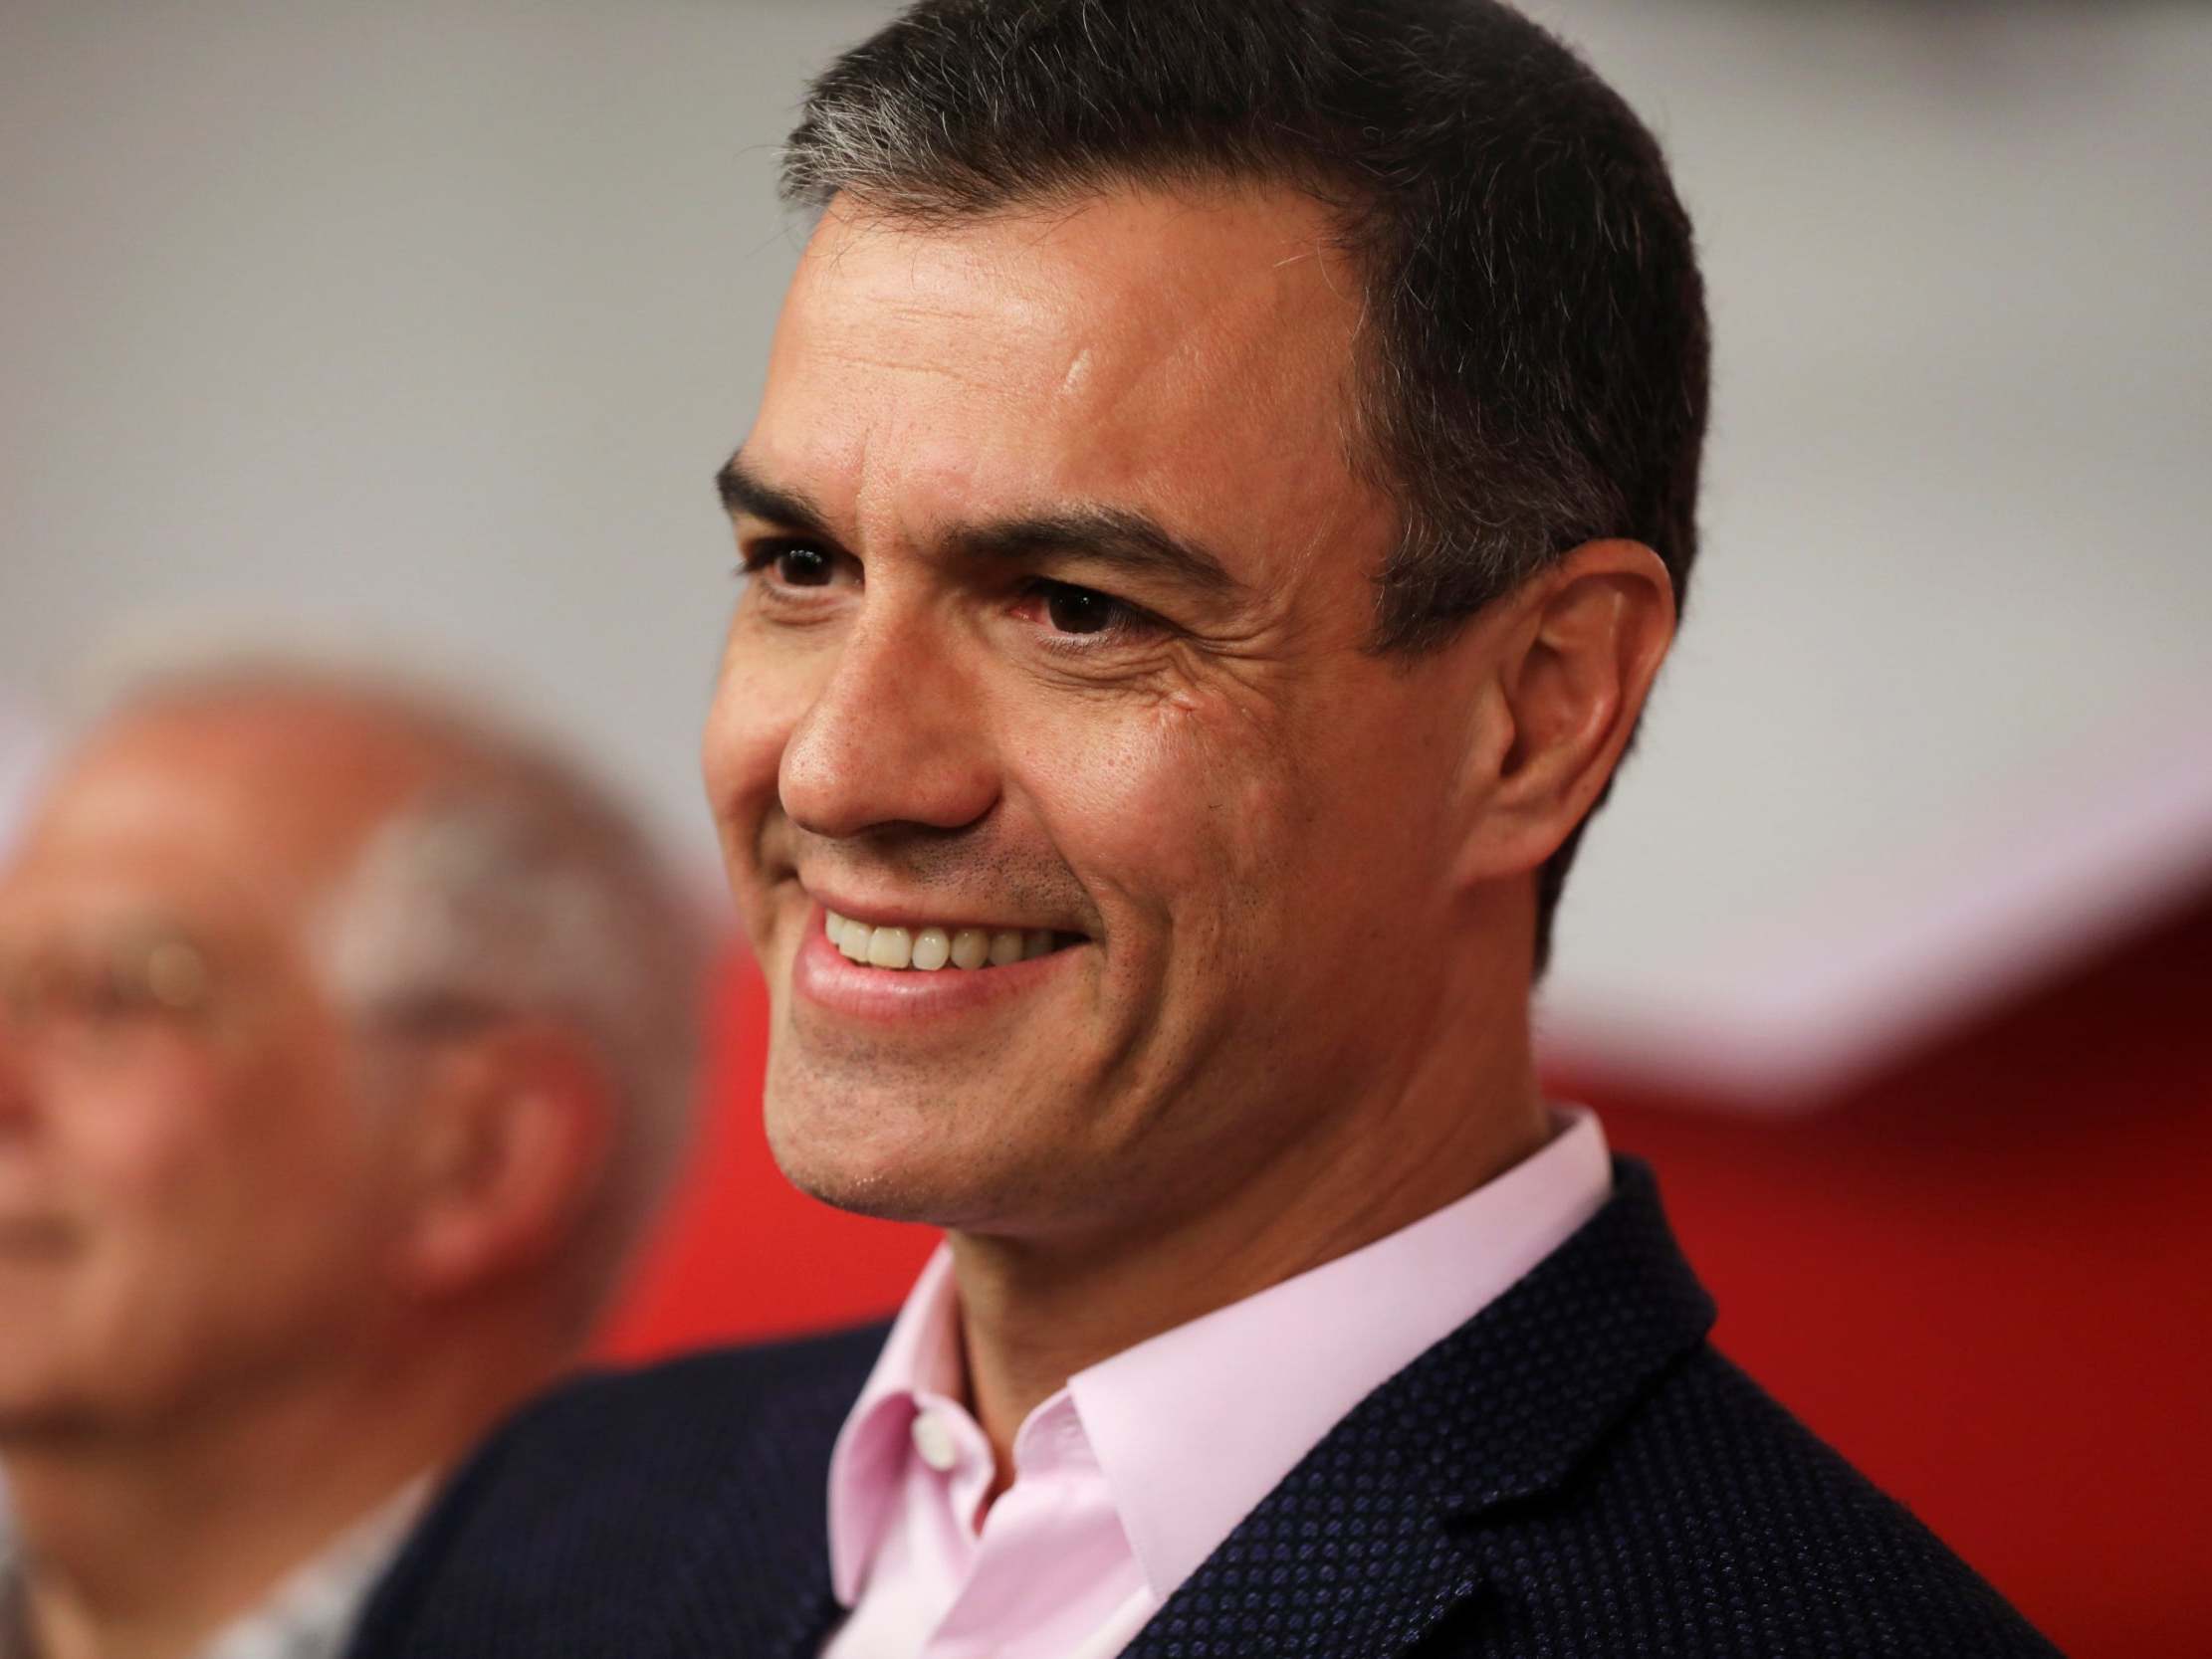 Spanish prime minister Pedro Sanchez now heads up the biggest social democrat delegation of any EU country